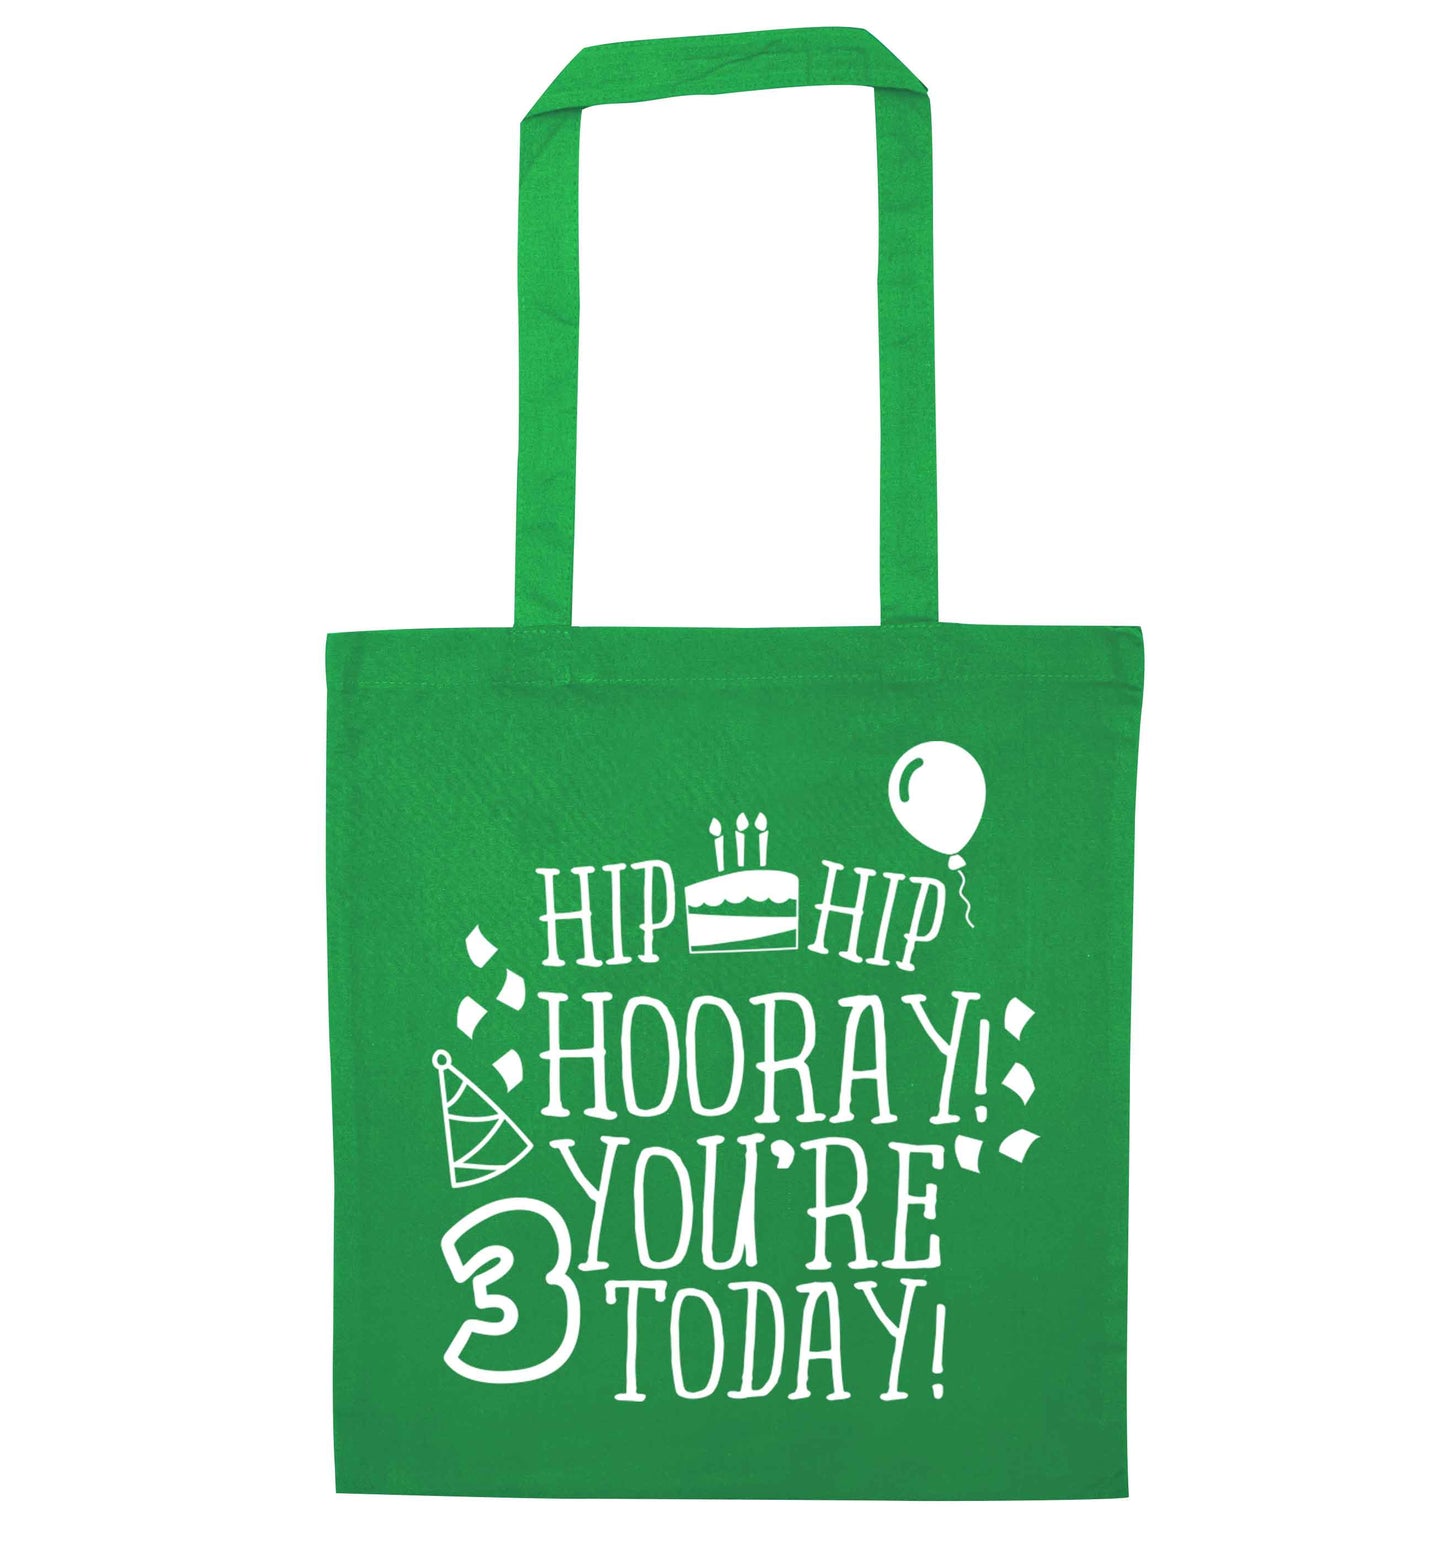 You're 3 Todaygreen tote bag